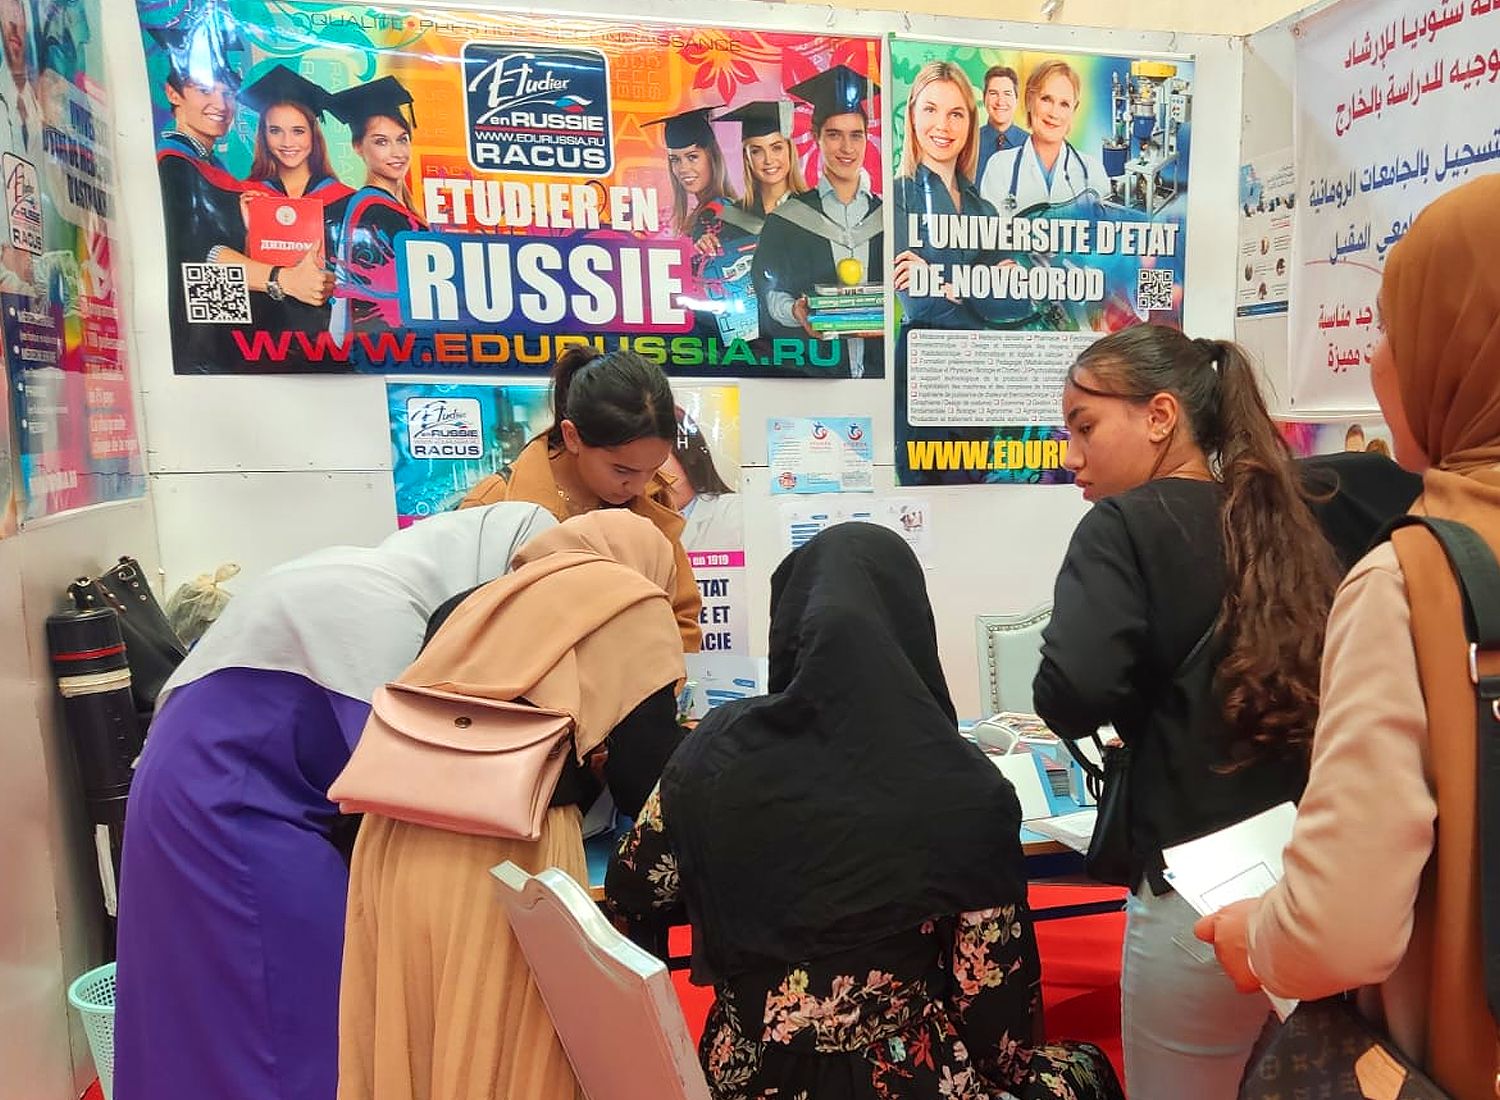 Moroccan students and their parents personally met representatives of RACUS group Russian state universities at the exhibitions and received their consultations. The visitors of the exhibition watched videos about Russian universities in French and Arabic and received information brochures with answers to the most popular questions: "How to enroll in a Russian university?", "Do I need a visa to come to Russia?", "How do foreign students adapt to the new culture?", "How to choose the right university and specialty?", "What are the requirements of migration legislation?" and many other questions.